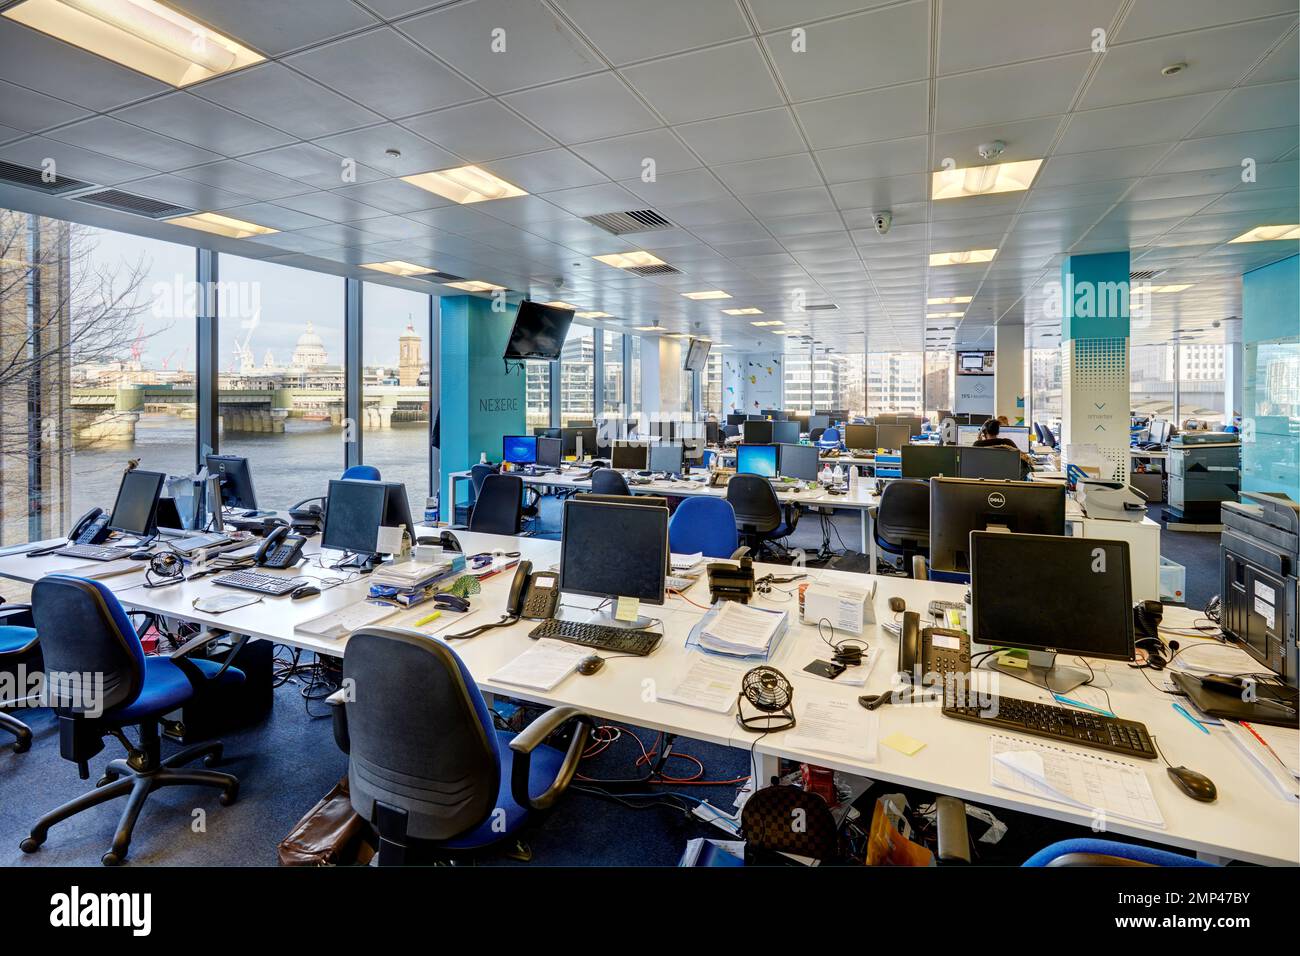 office desks terminals screen trading business city money empty trade exchange shares investment bank banking modern windows view london capital hedge Stock Photo